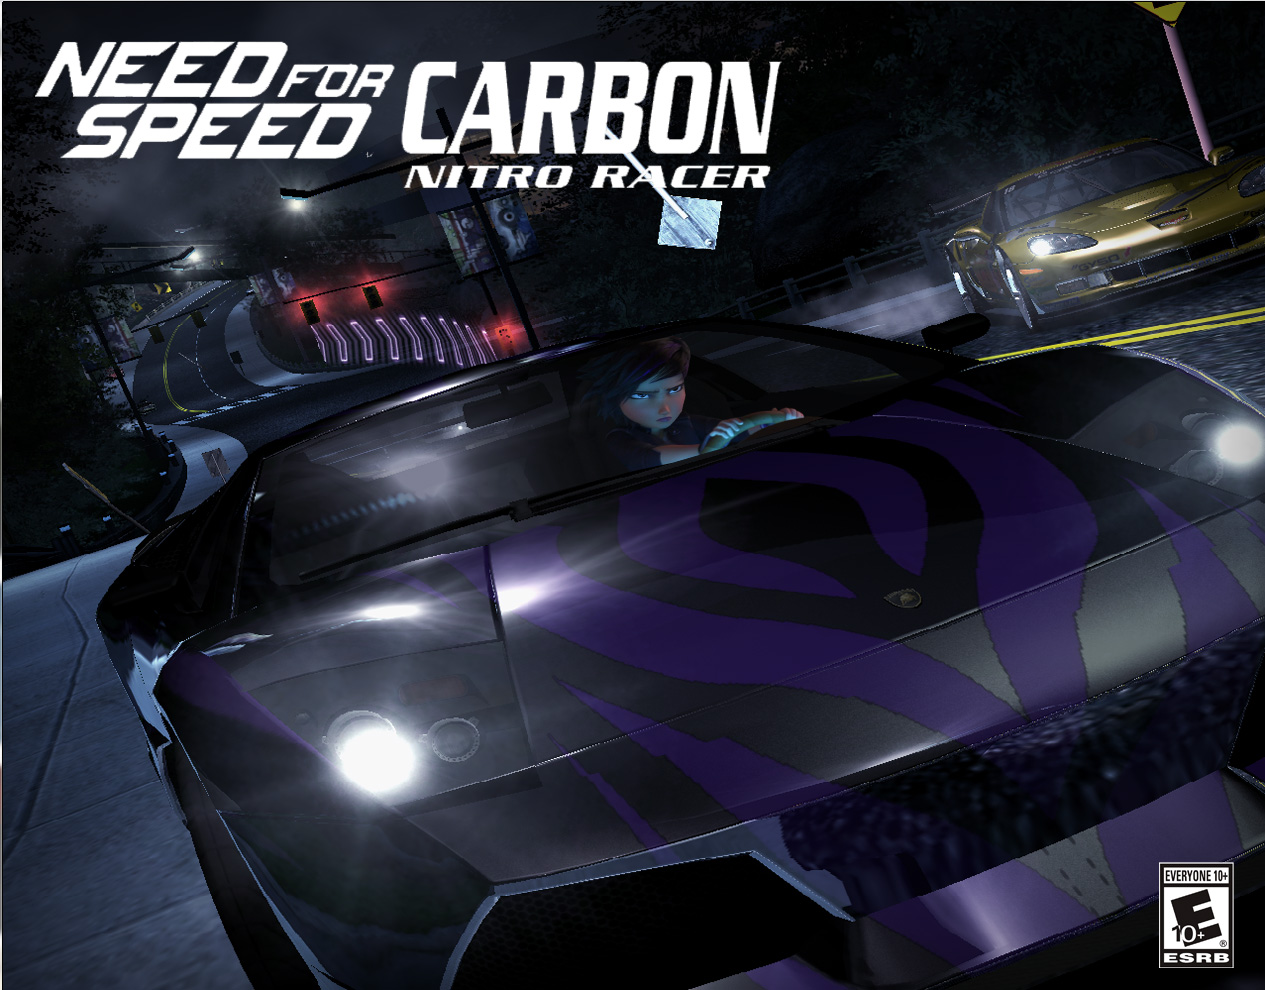 Need for Speed Carbon Nitro Racer by Rainbow-Dash-Rockz